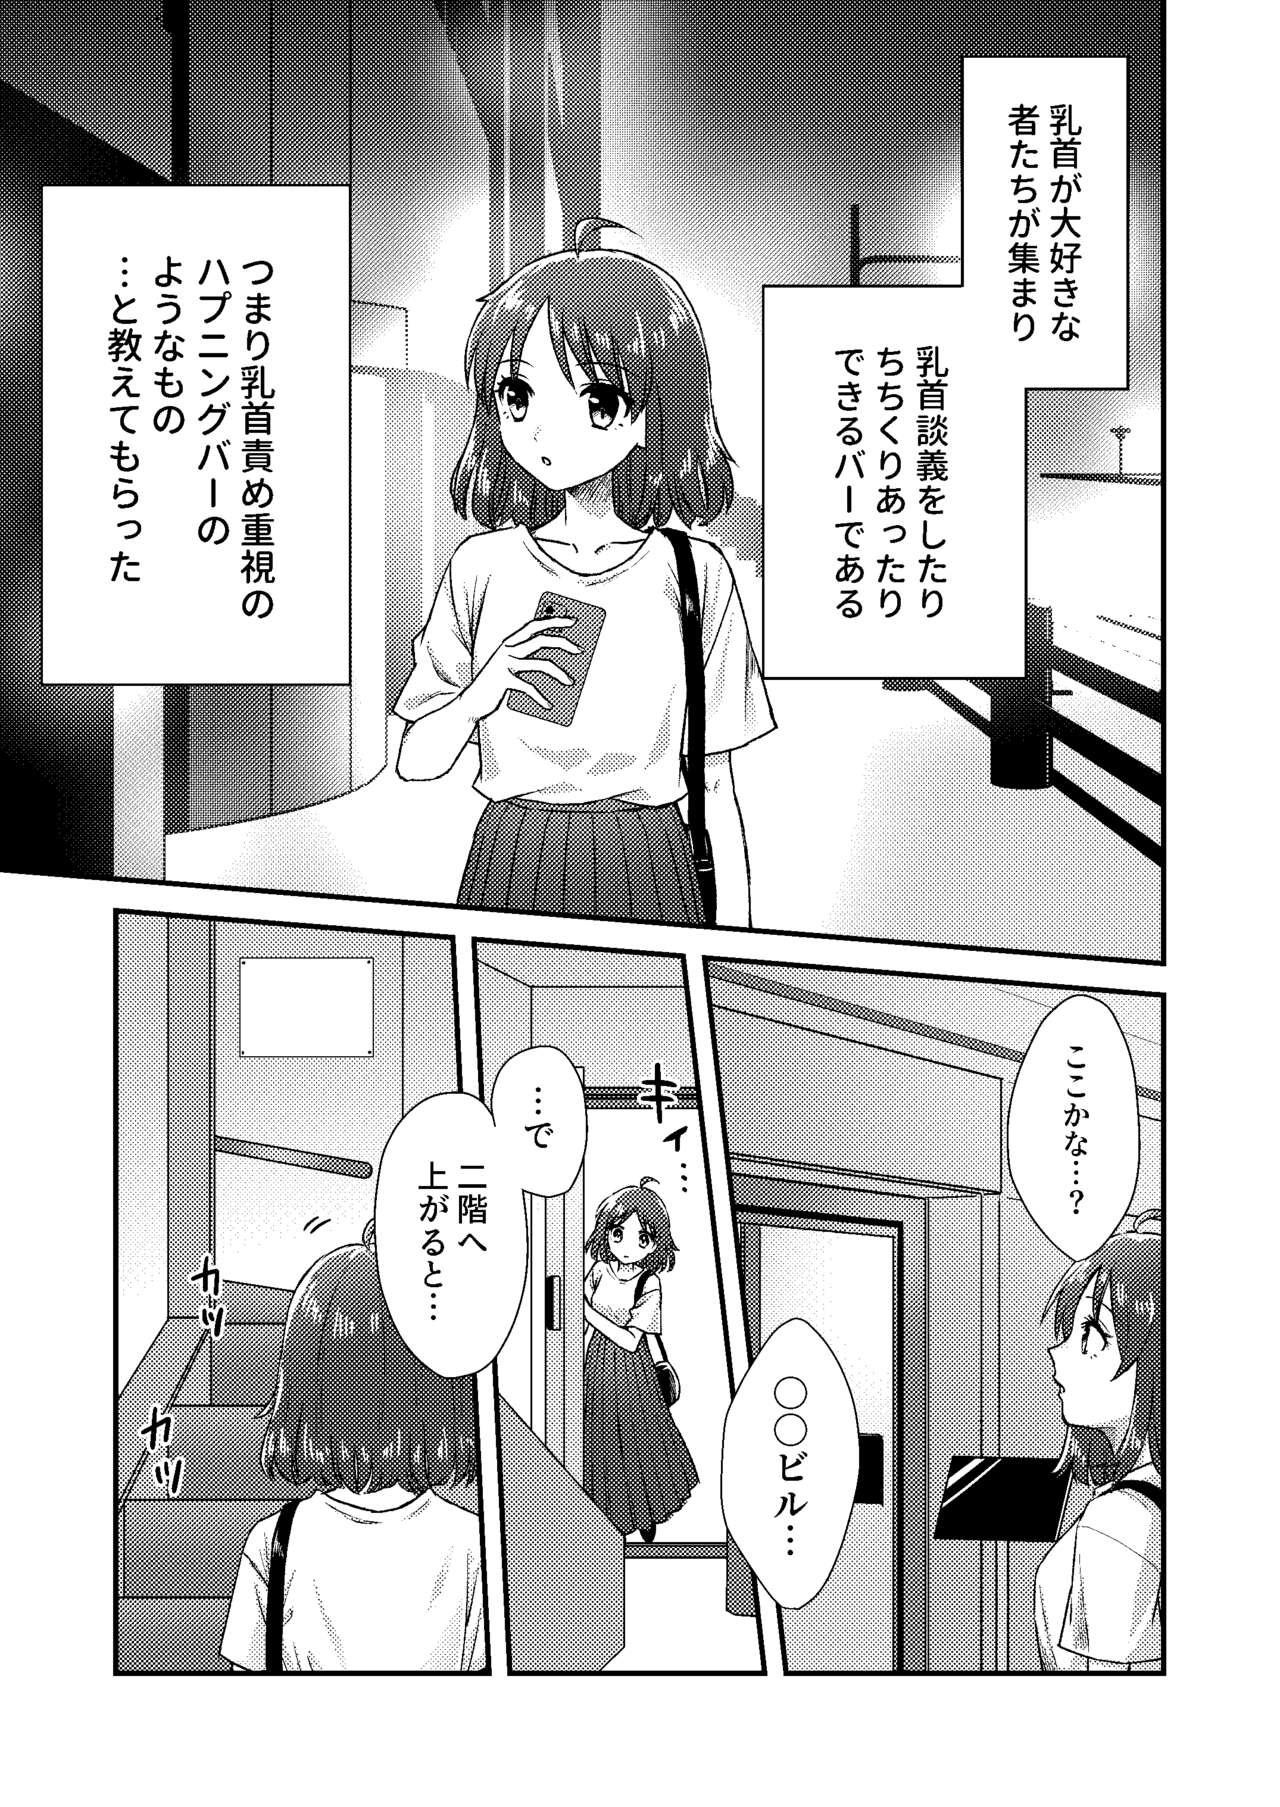 Fishnet にぷばー #1 つきみちゃんの場合 Topless - Page 7